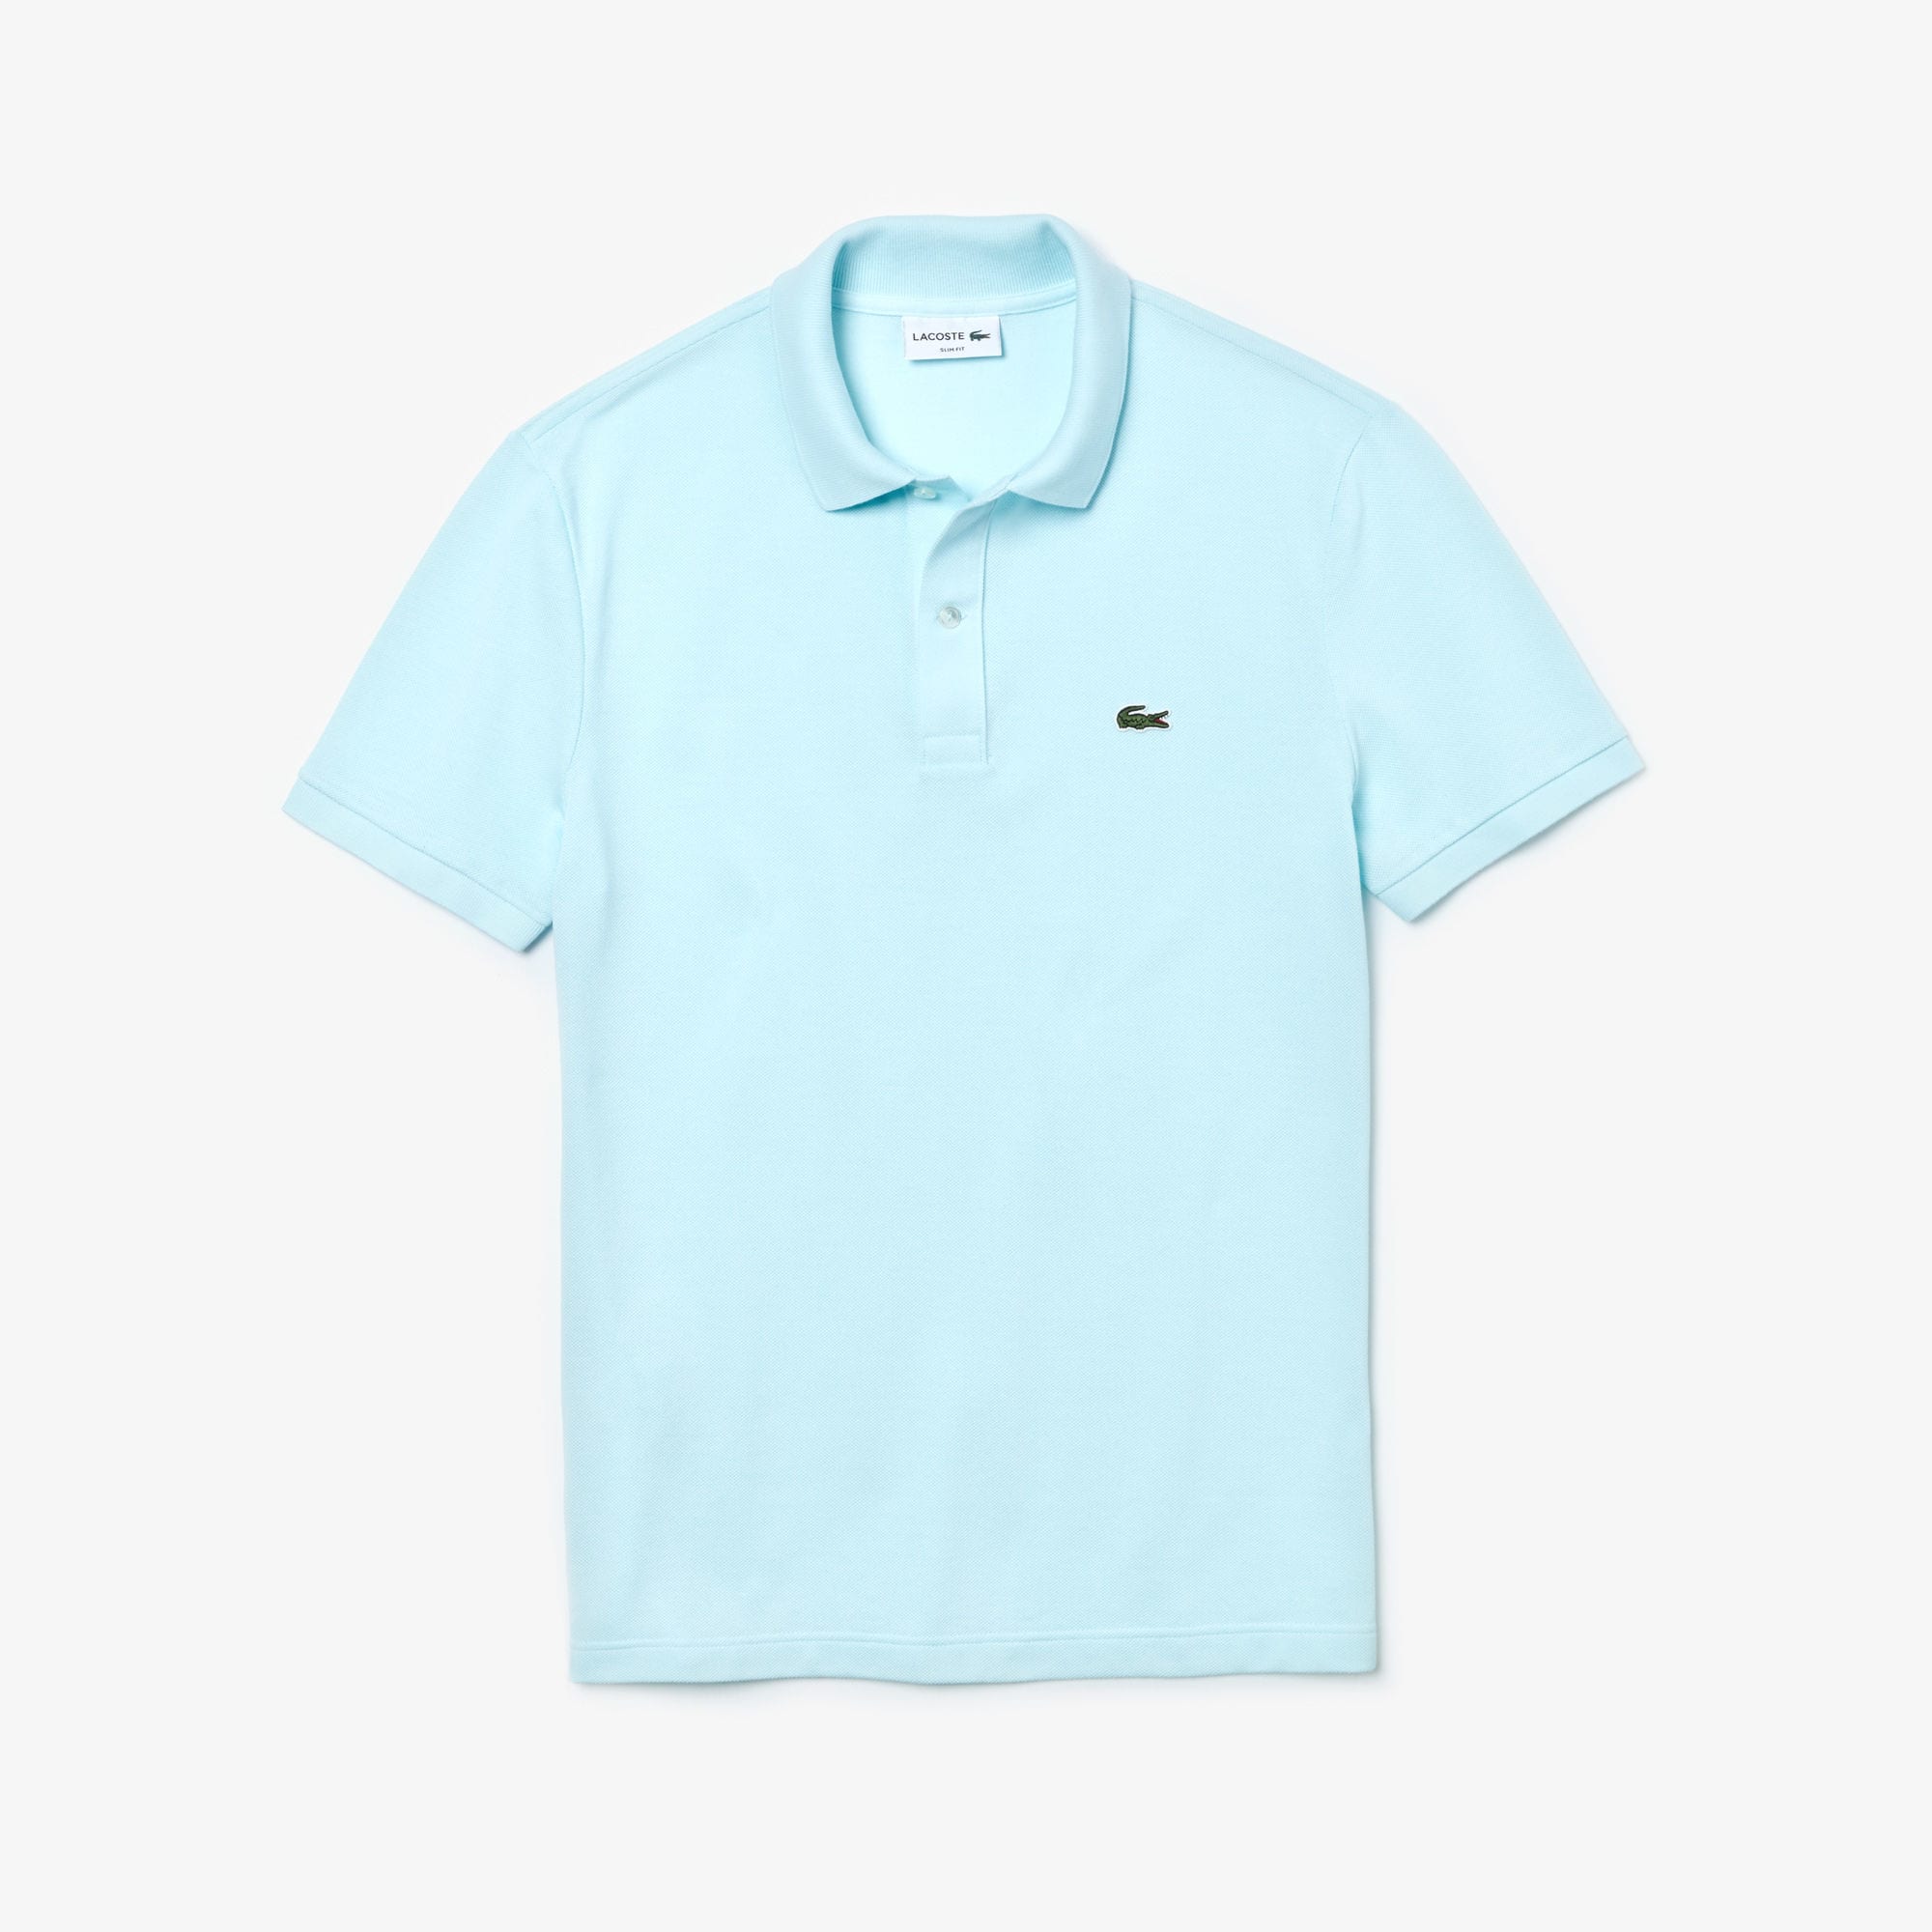 LACOSTE POLO SHIRT LIGHT BLUE: Buy sell 